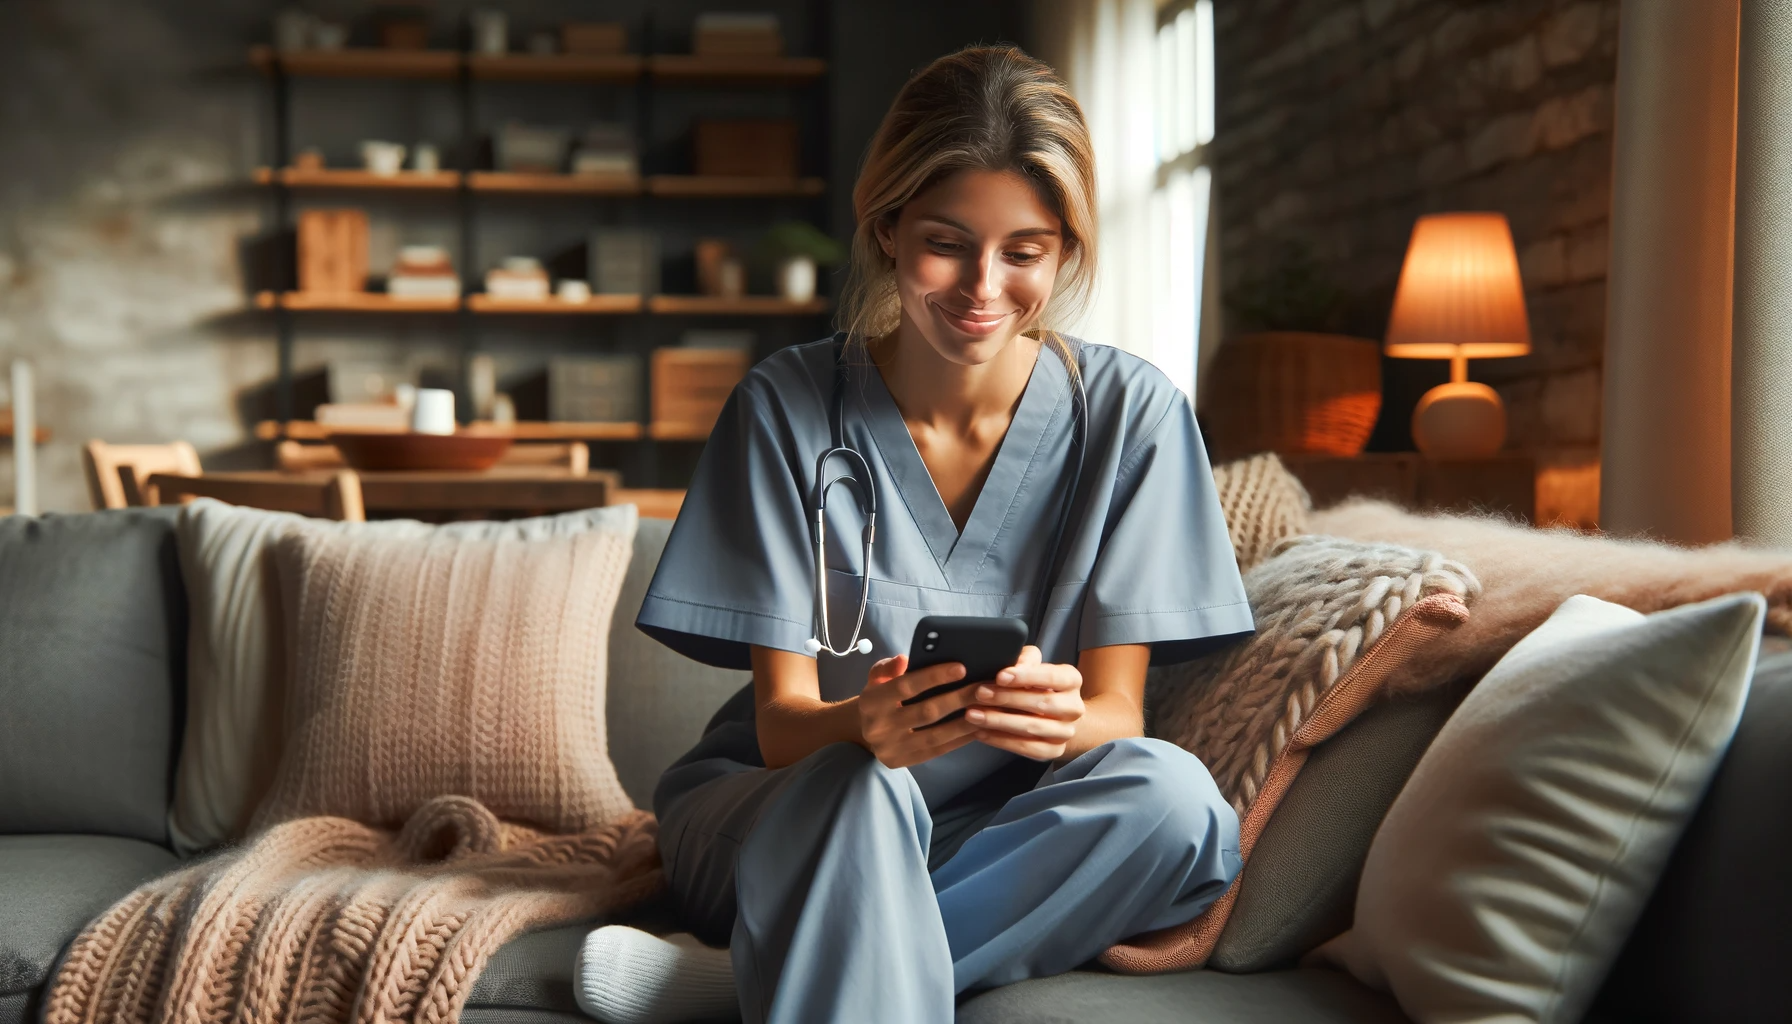 A nurse looks for home health visits to pick up from the SHIFTit app while she relaxes at home.